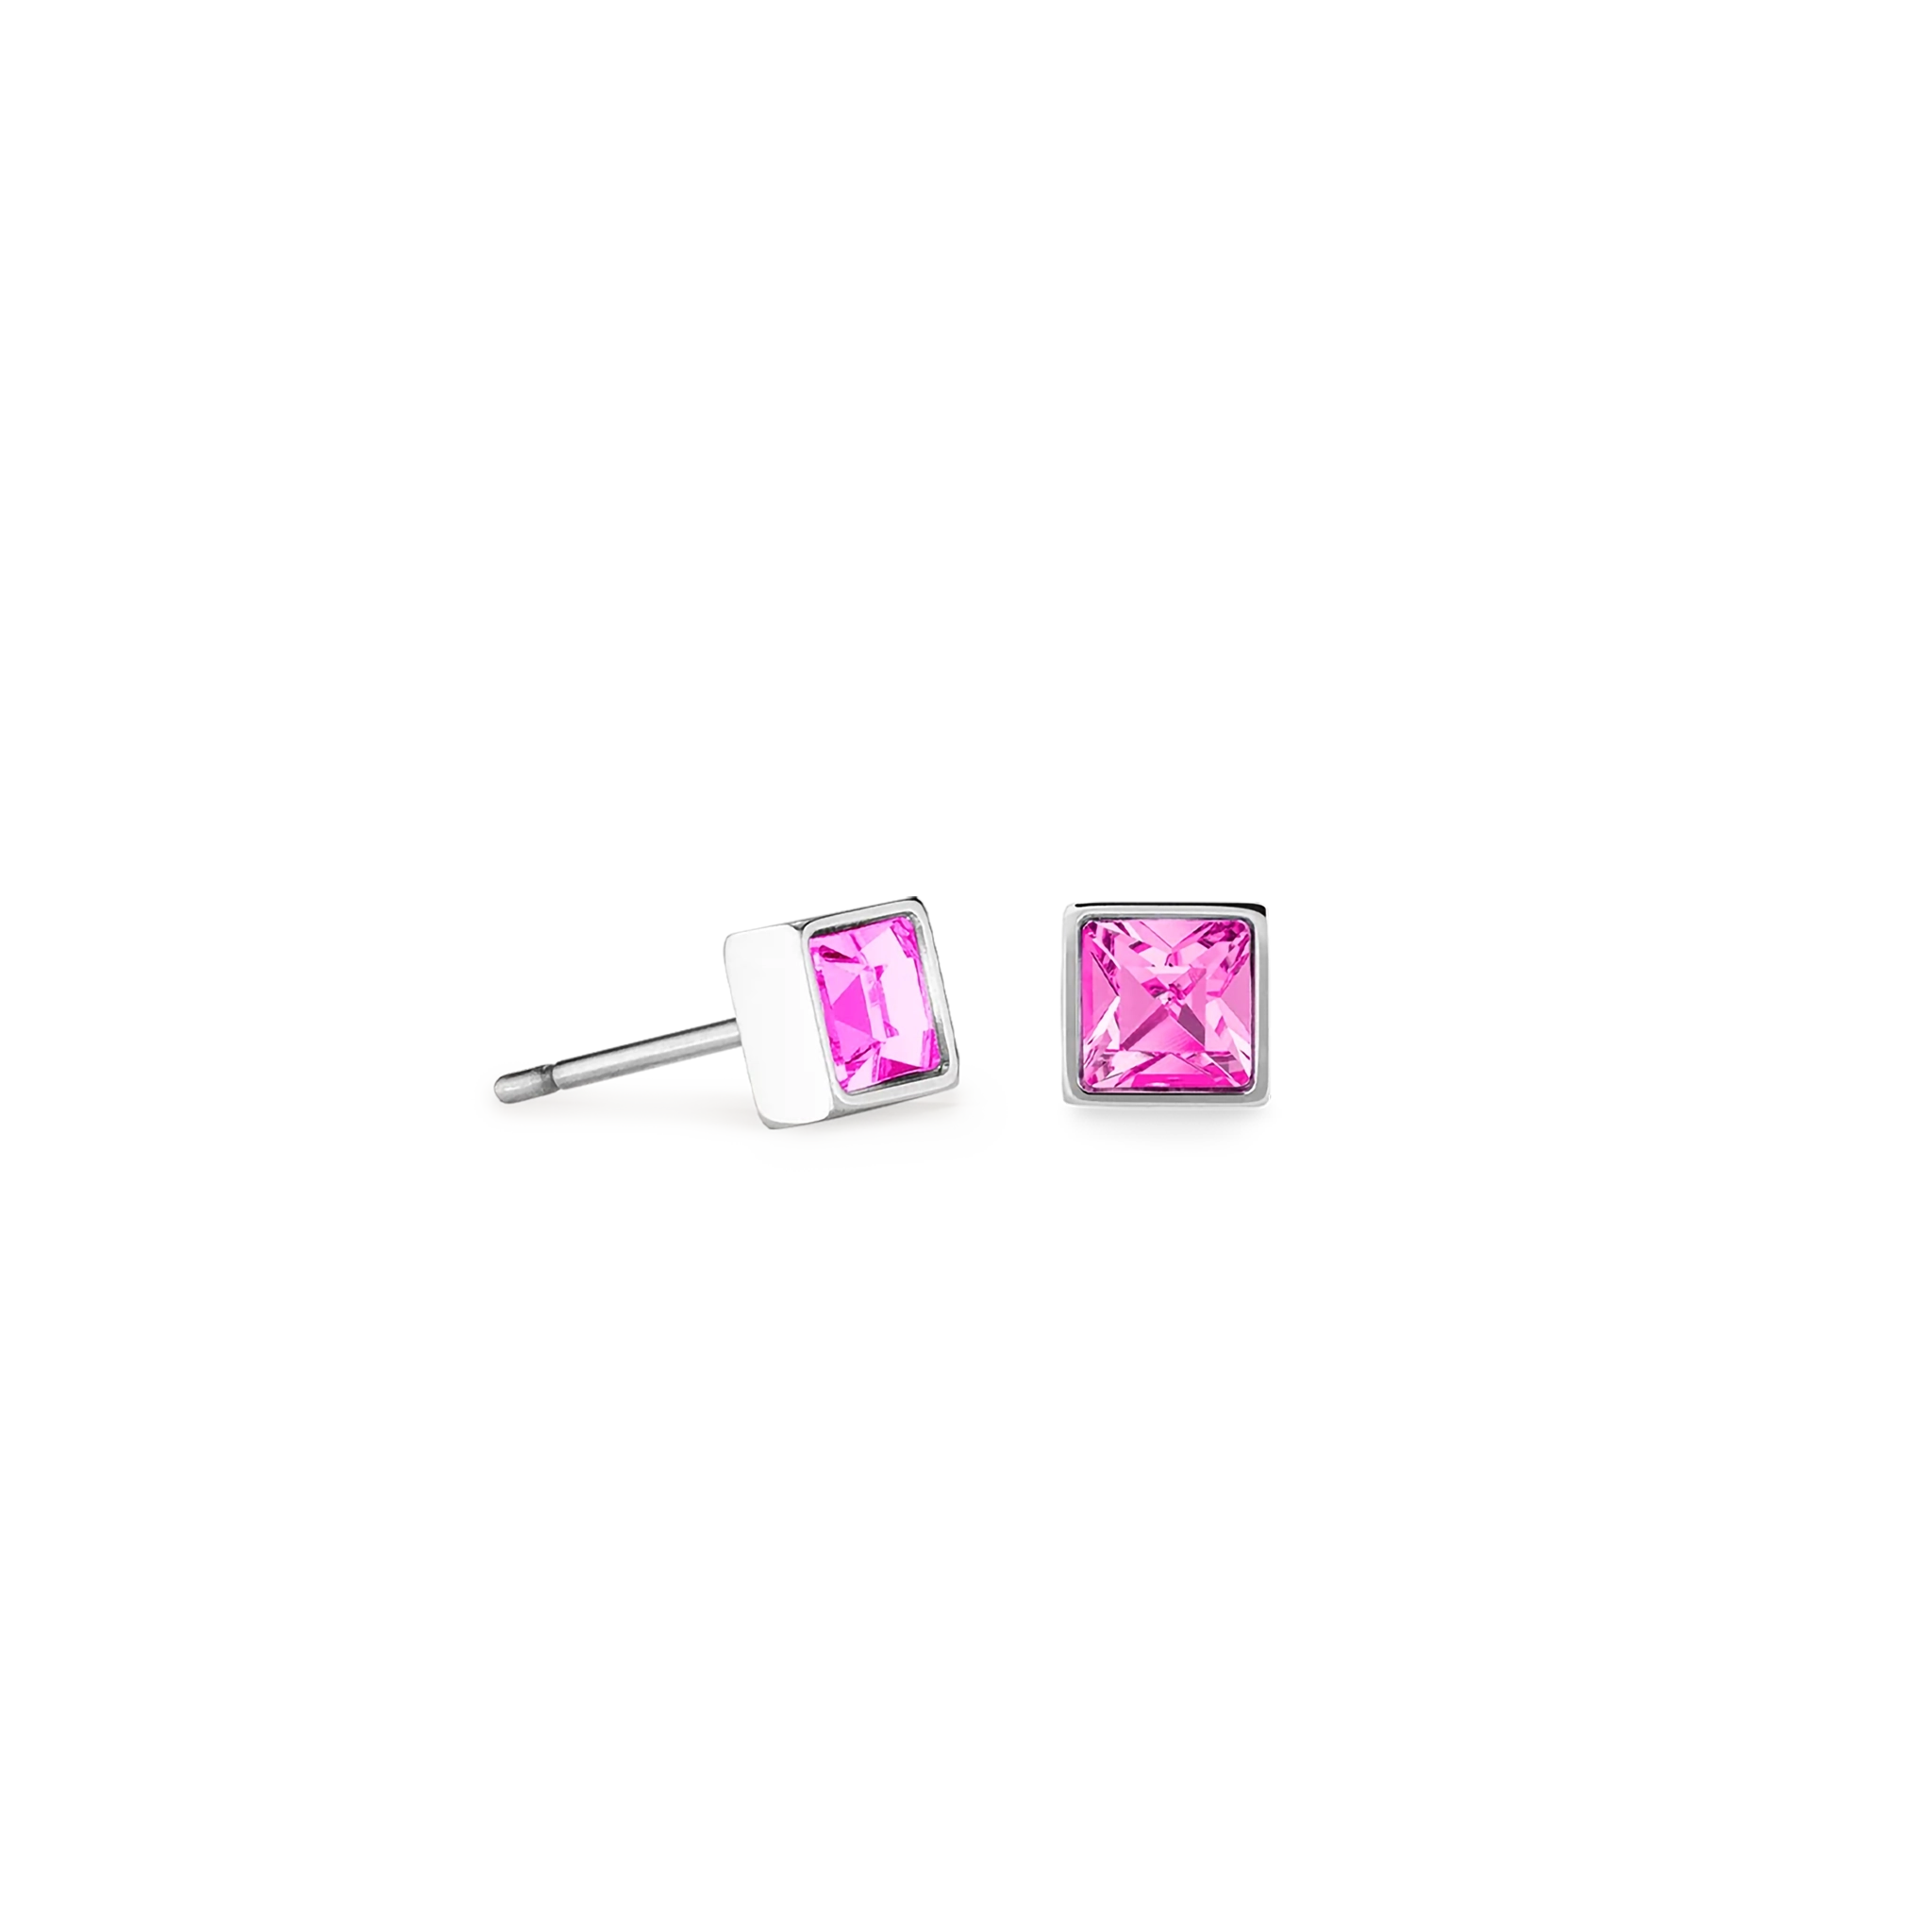 A pair of square steel stud earrings featuring a pink crystal stone